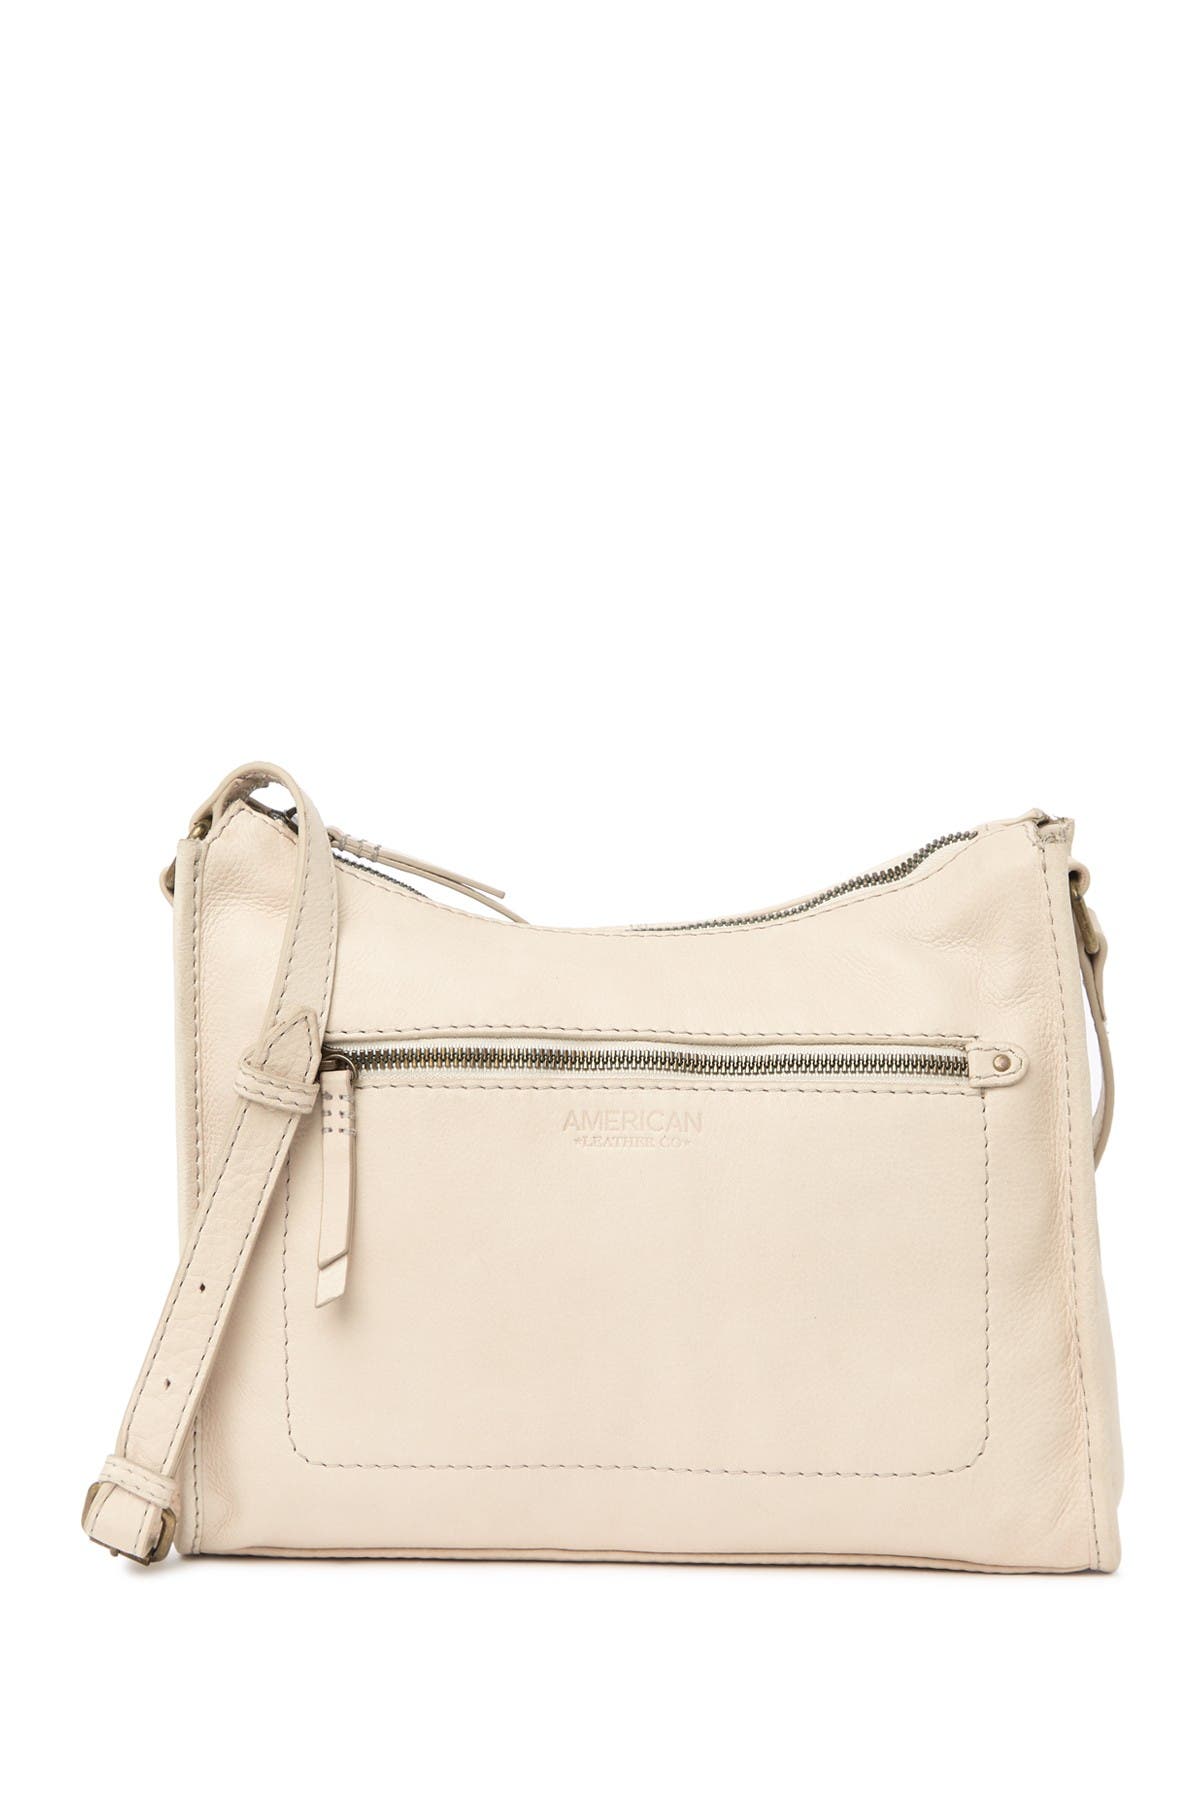 American Leather Co. Chadron Smooth Leather Crossbody In Stone Smooth